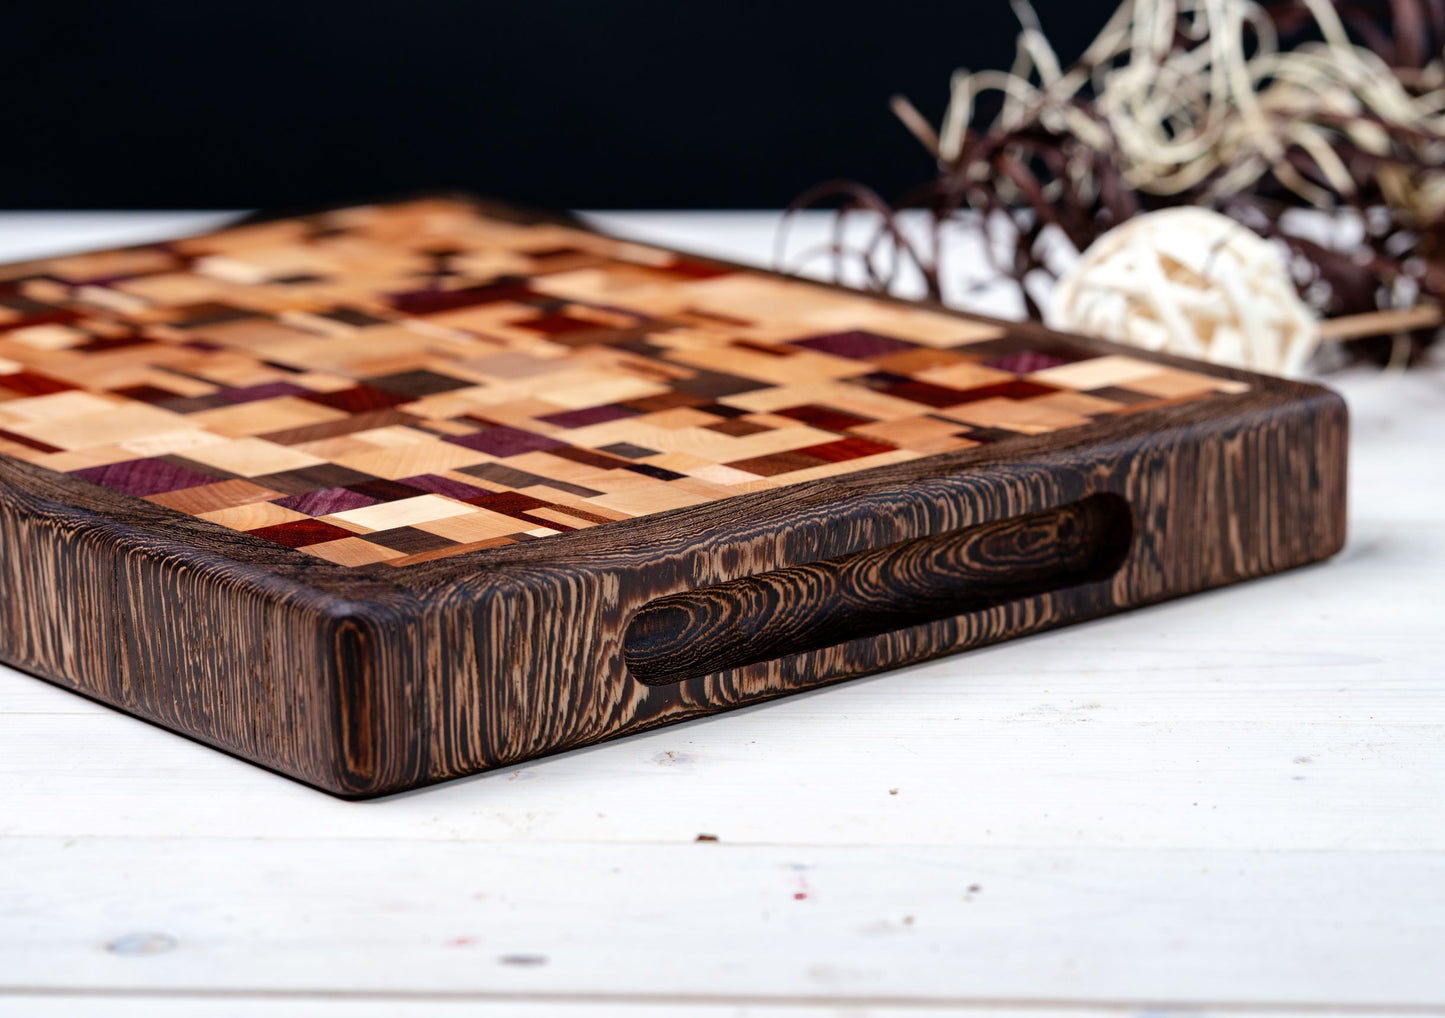 Chaos Design Cutting Board with Wenge Wood Frame